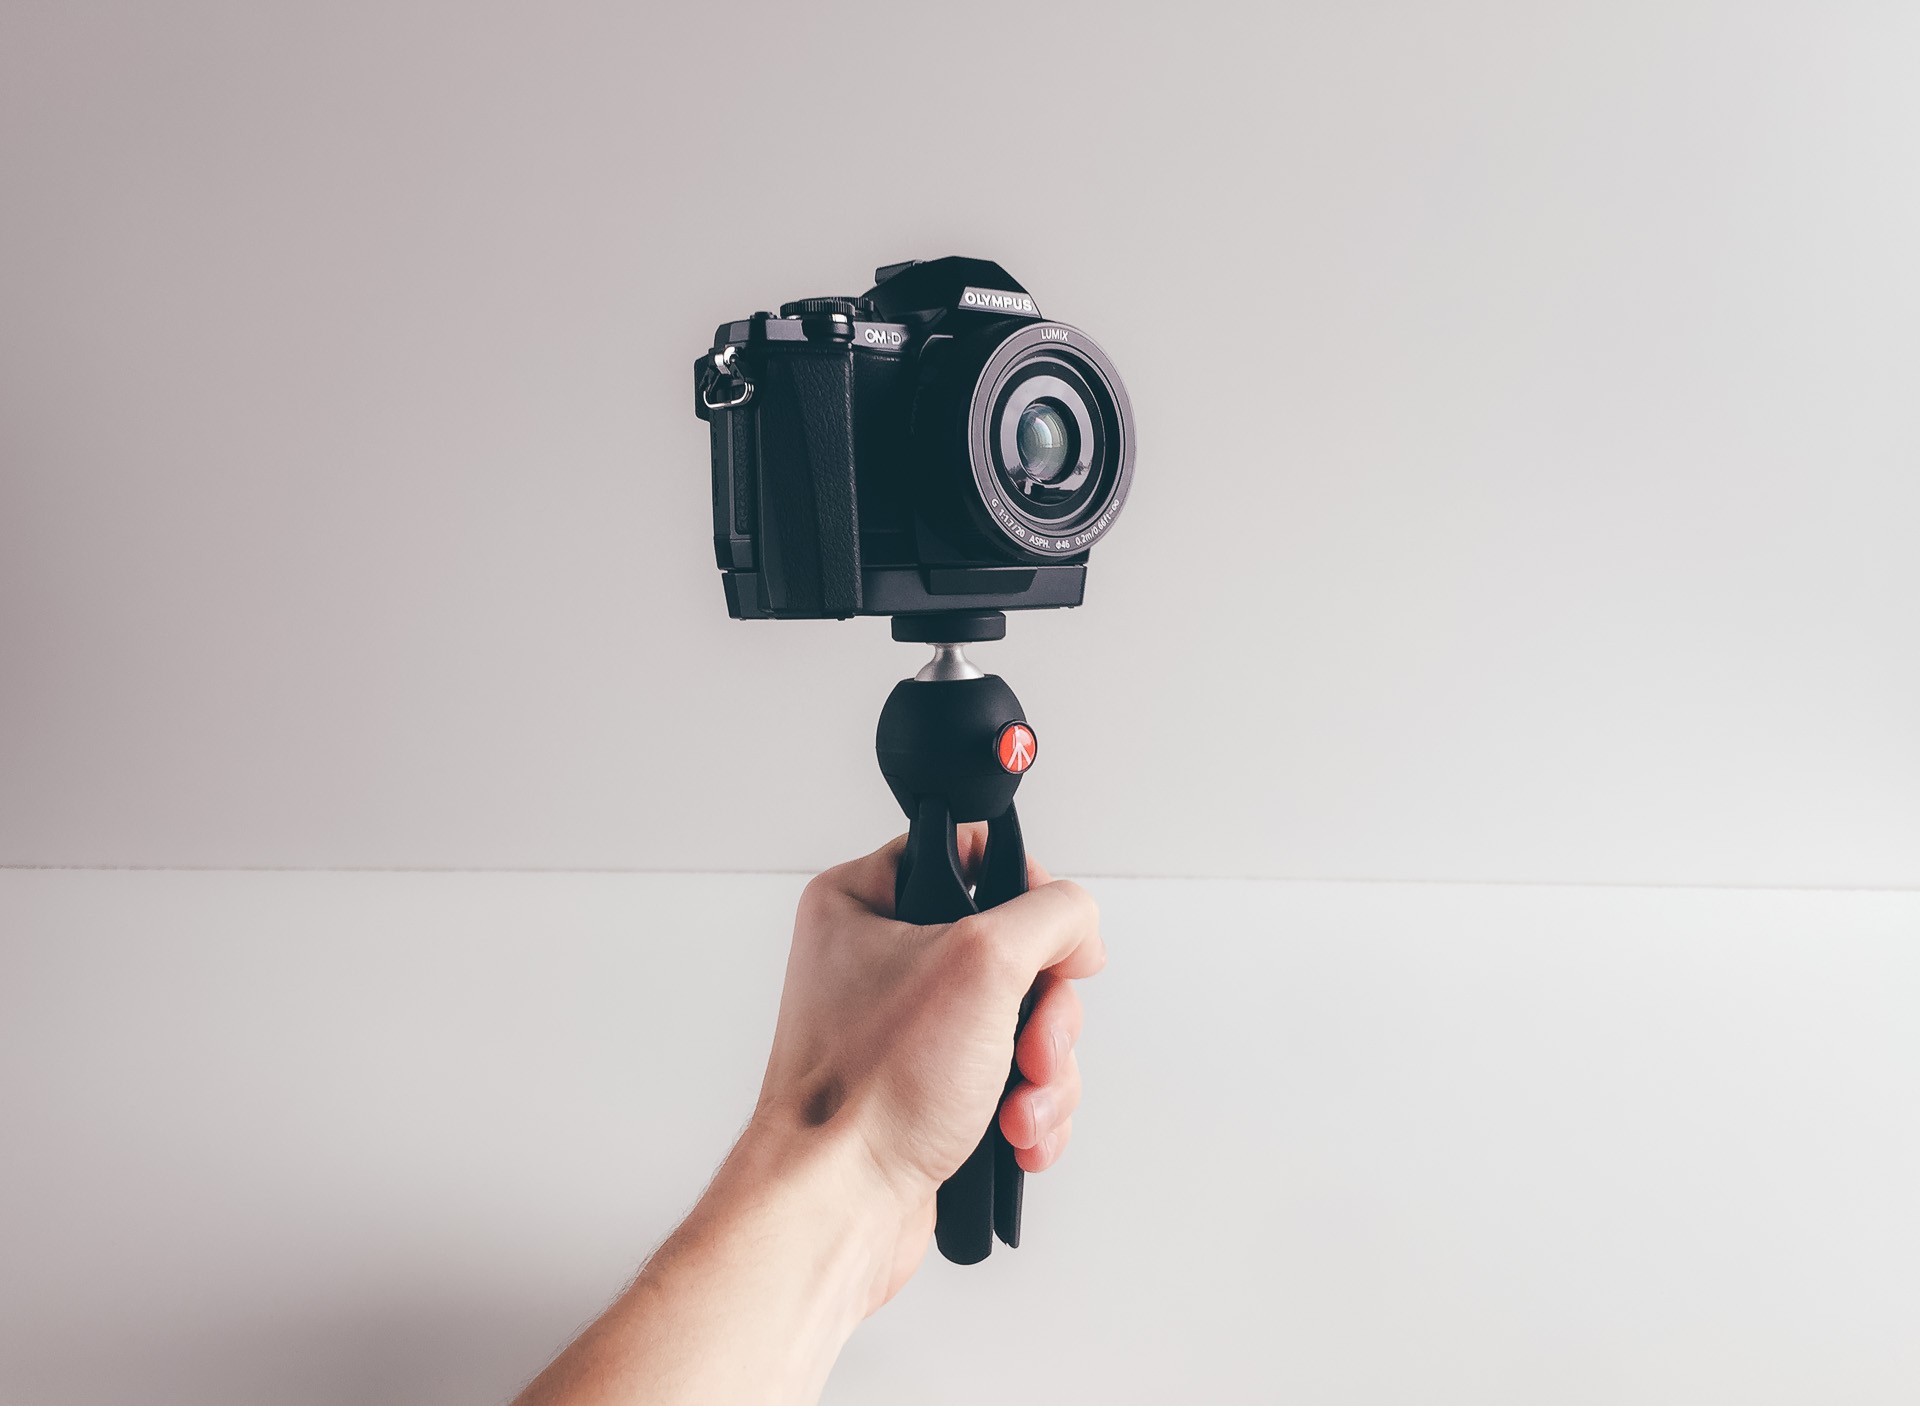 When collapsed, the PIXI Mini offers a creative way to comfortably grip your rig and to capture smoother video.